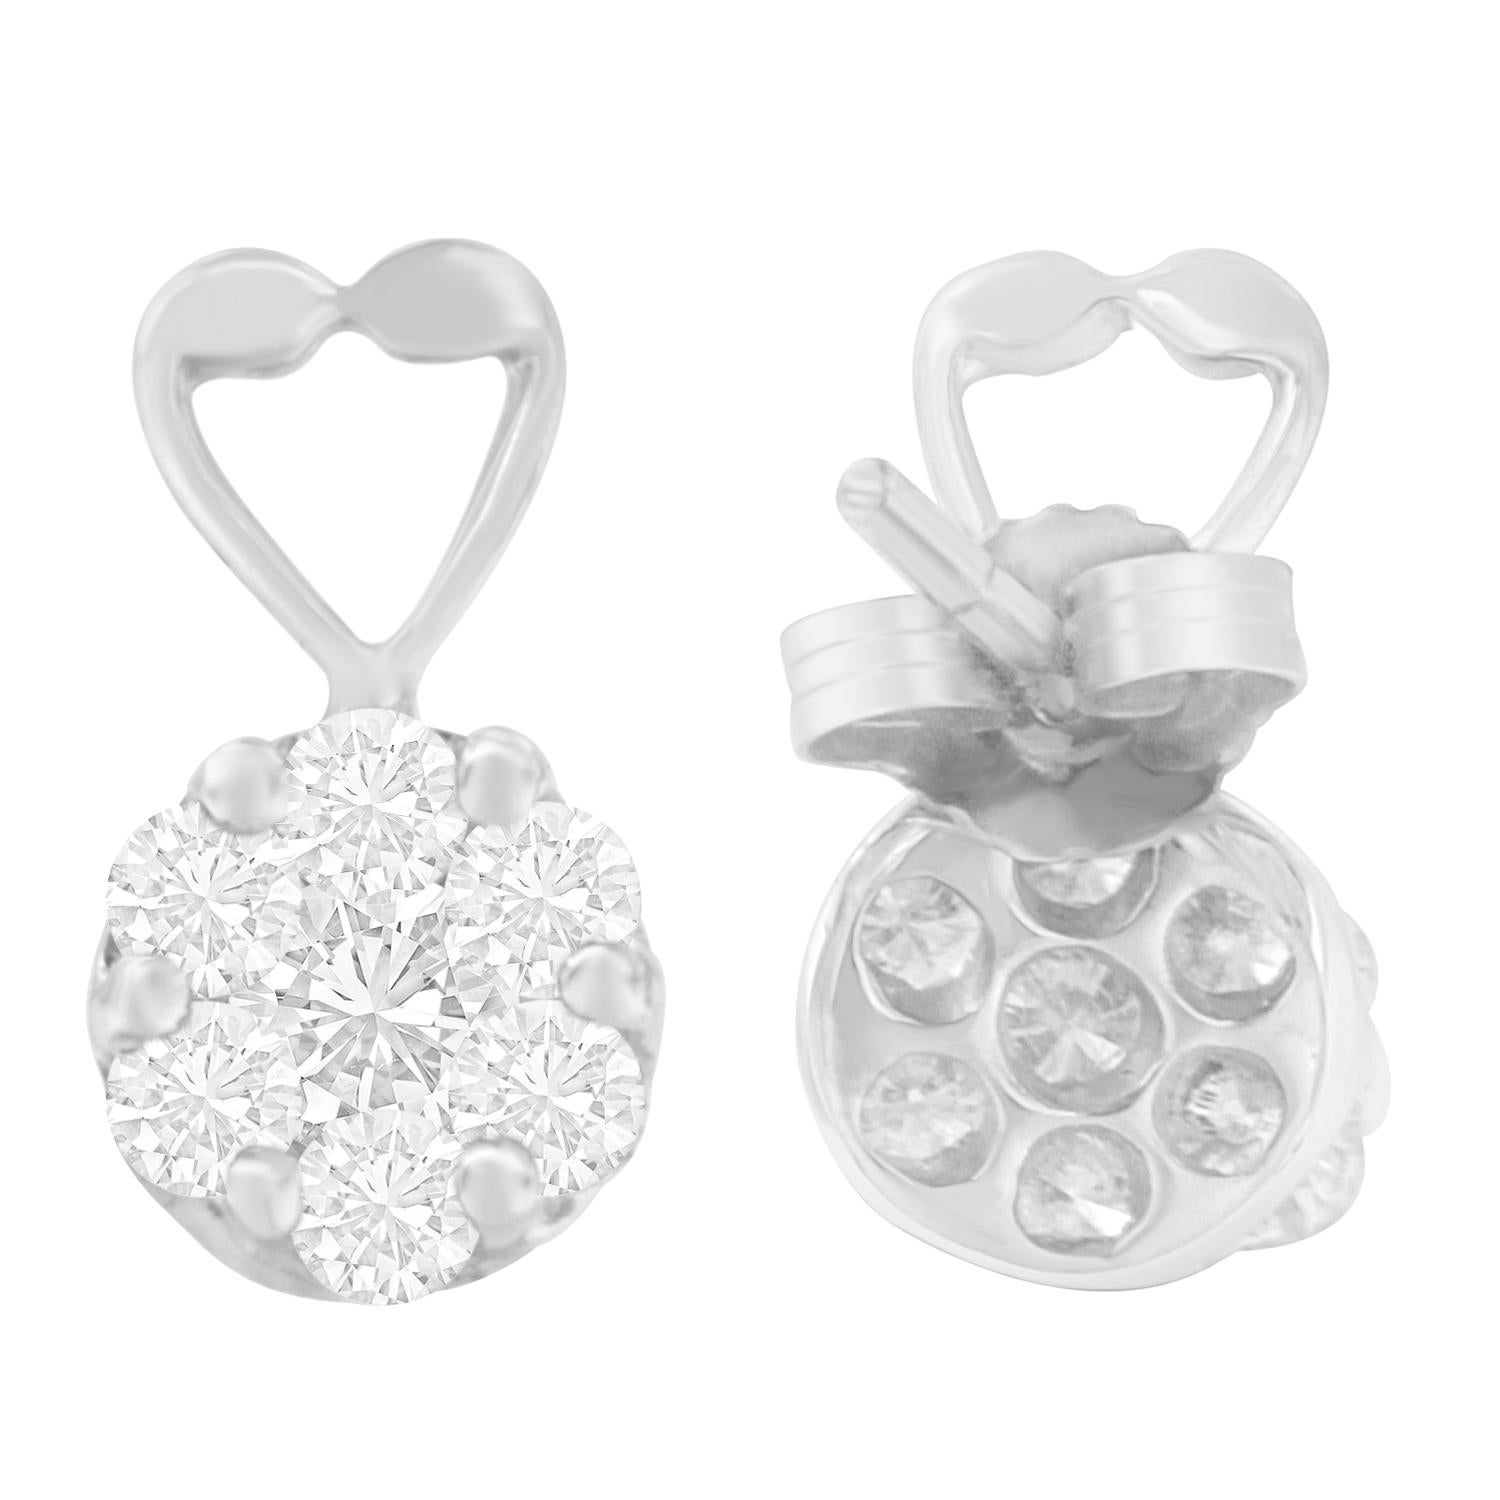 Stunning and elegant, these composite diamond earrings shimmer with 1 1/4 carat of genuine, shimmering diamonds. A high-polish finish enhances the 14k gold construction, completing the heart shaped jewelry with a lustrous finish. These natural